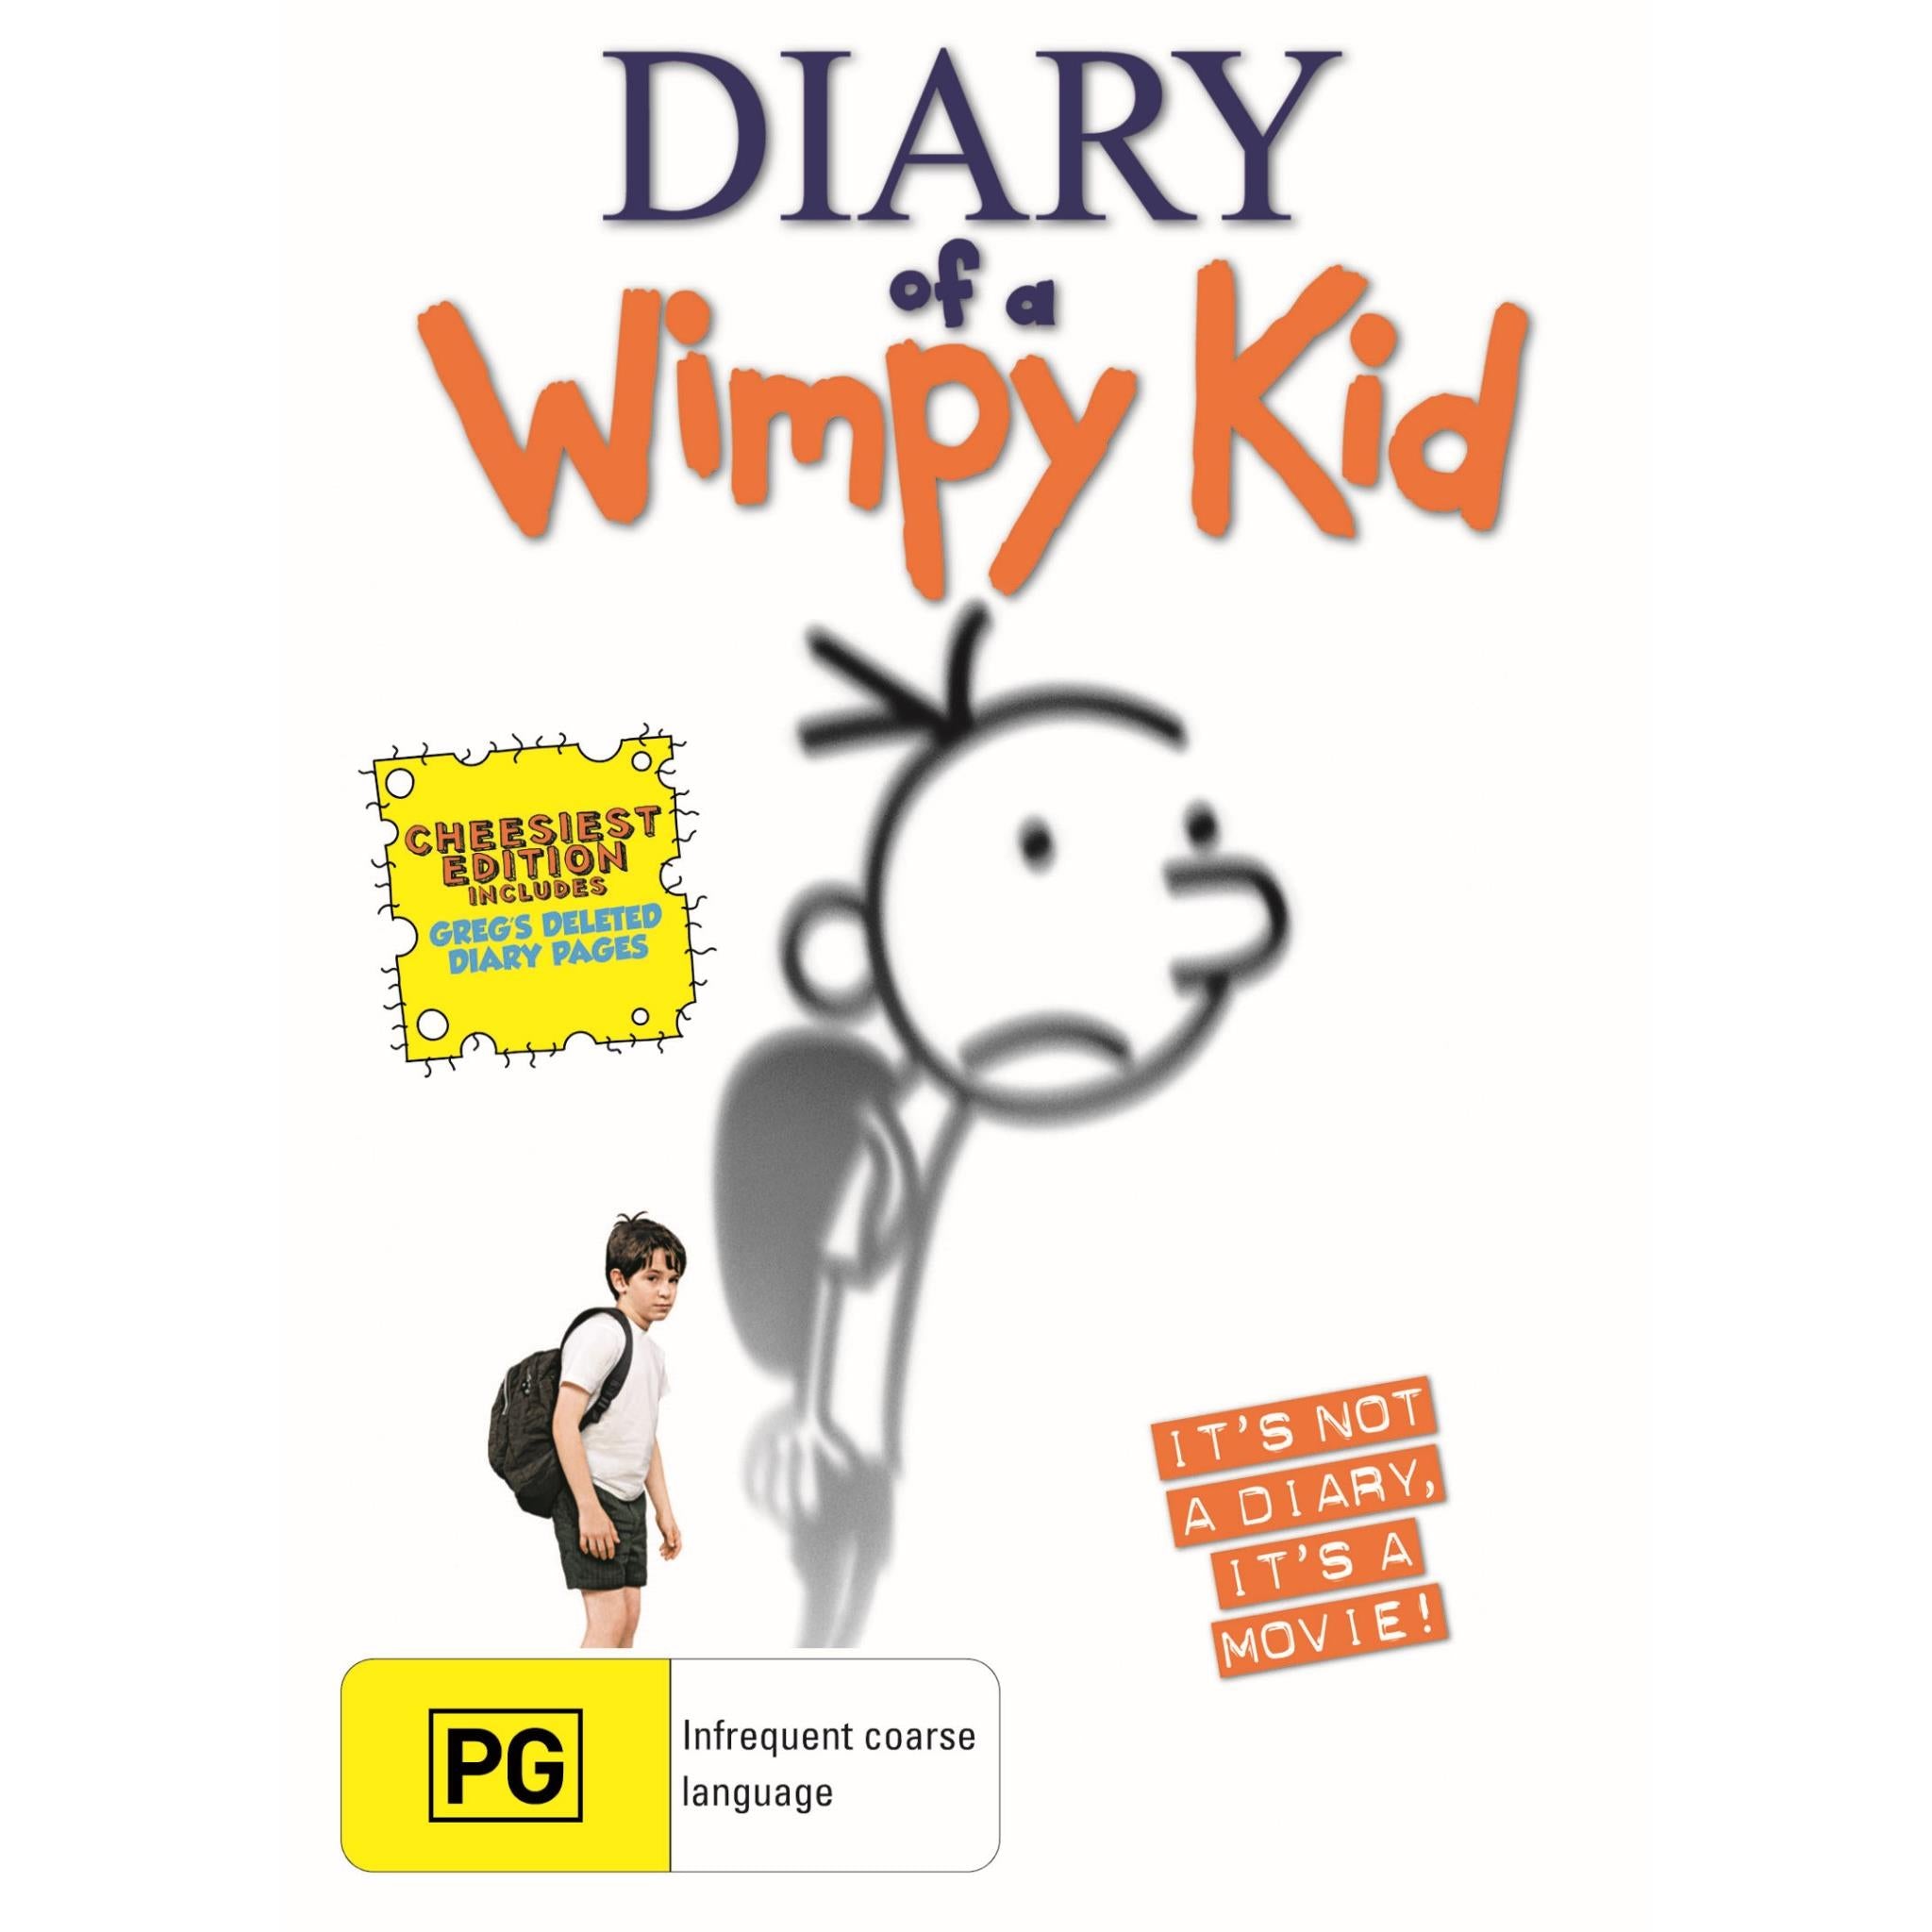 DIARY of Wimpy Kid